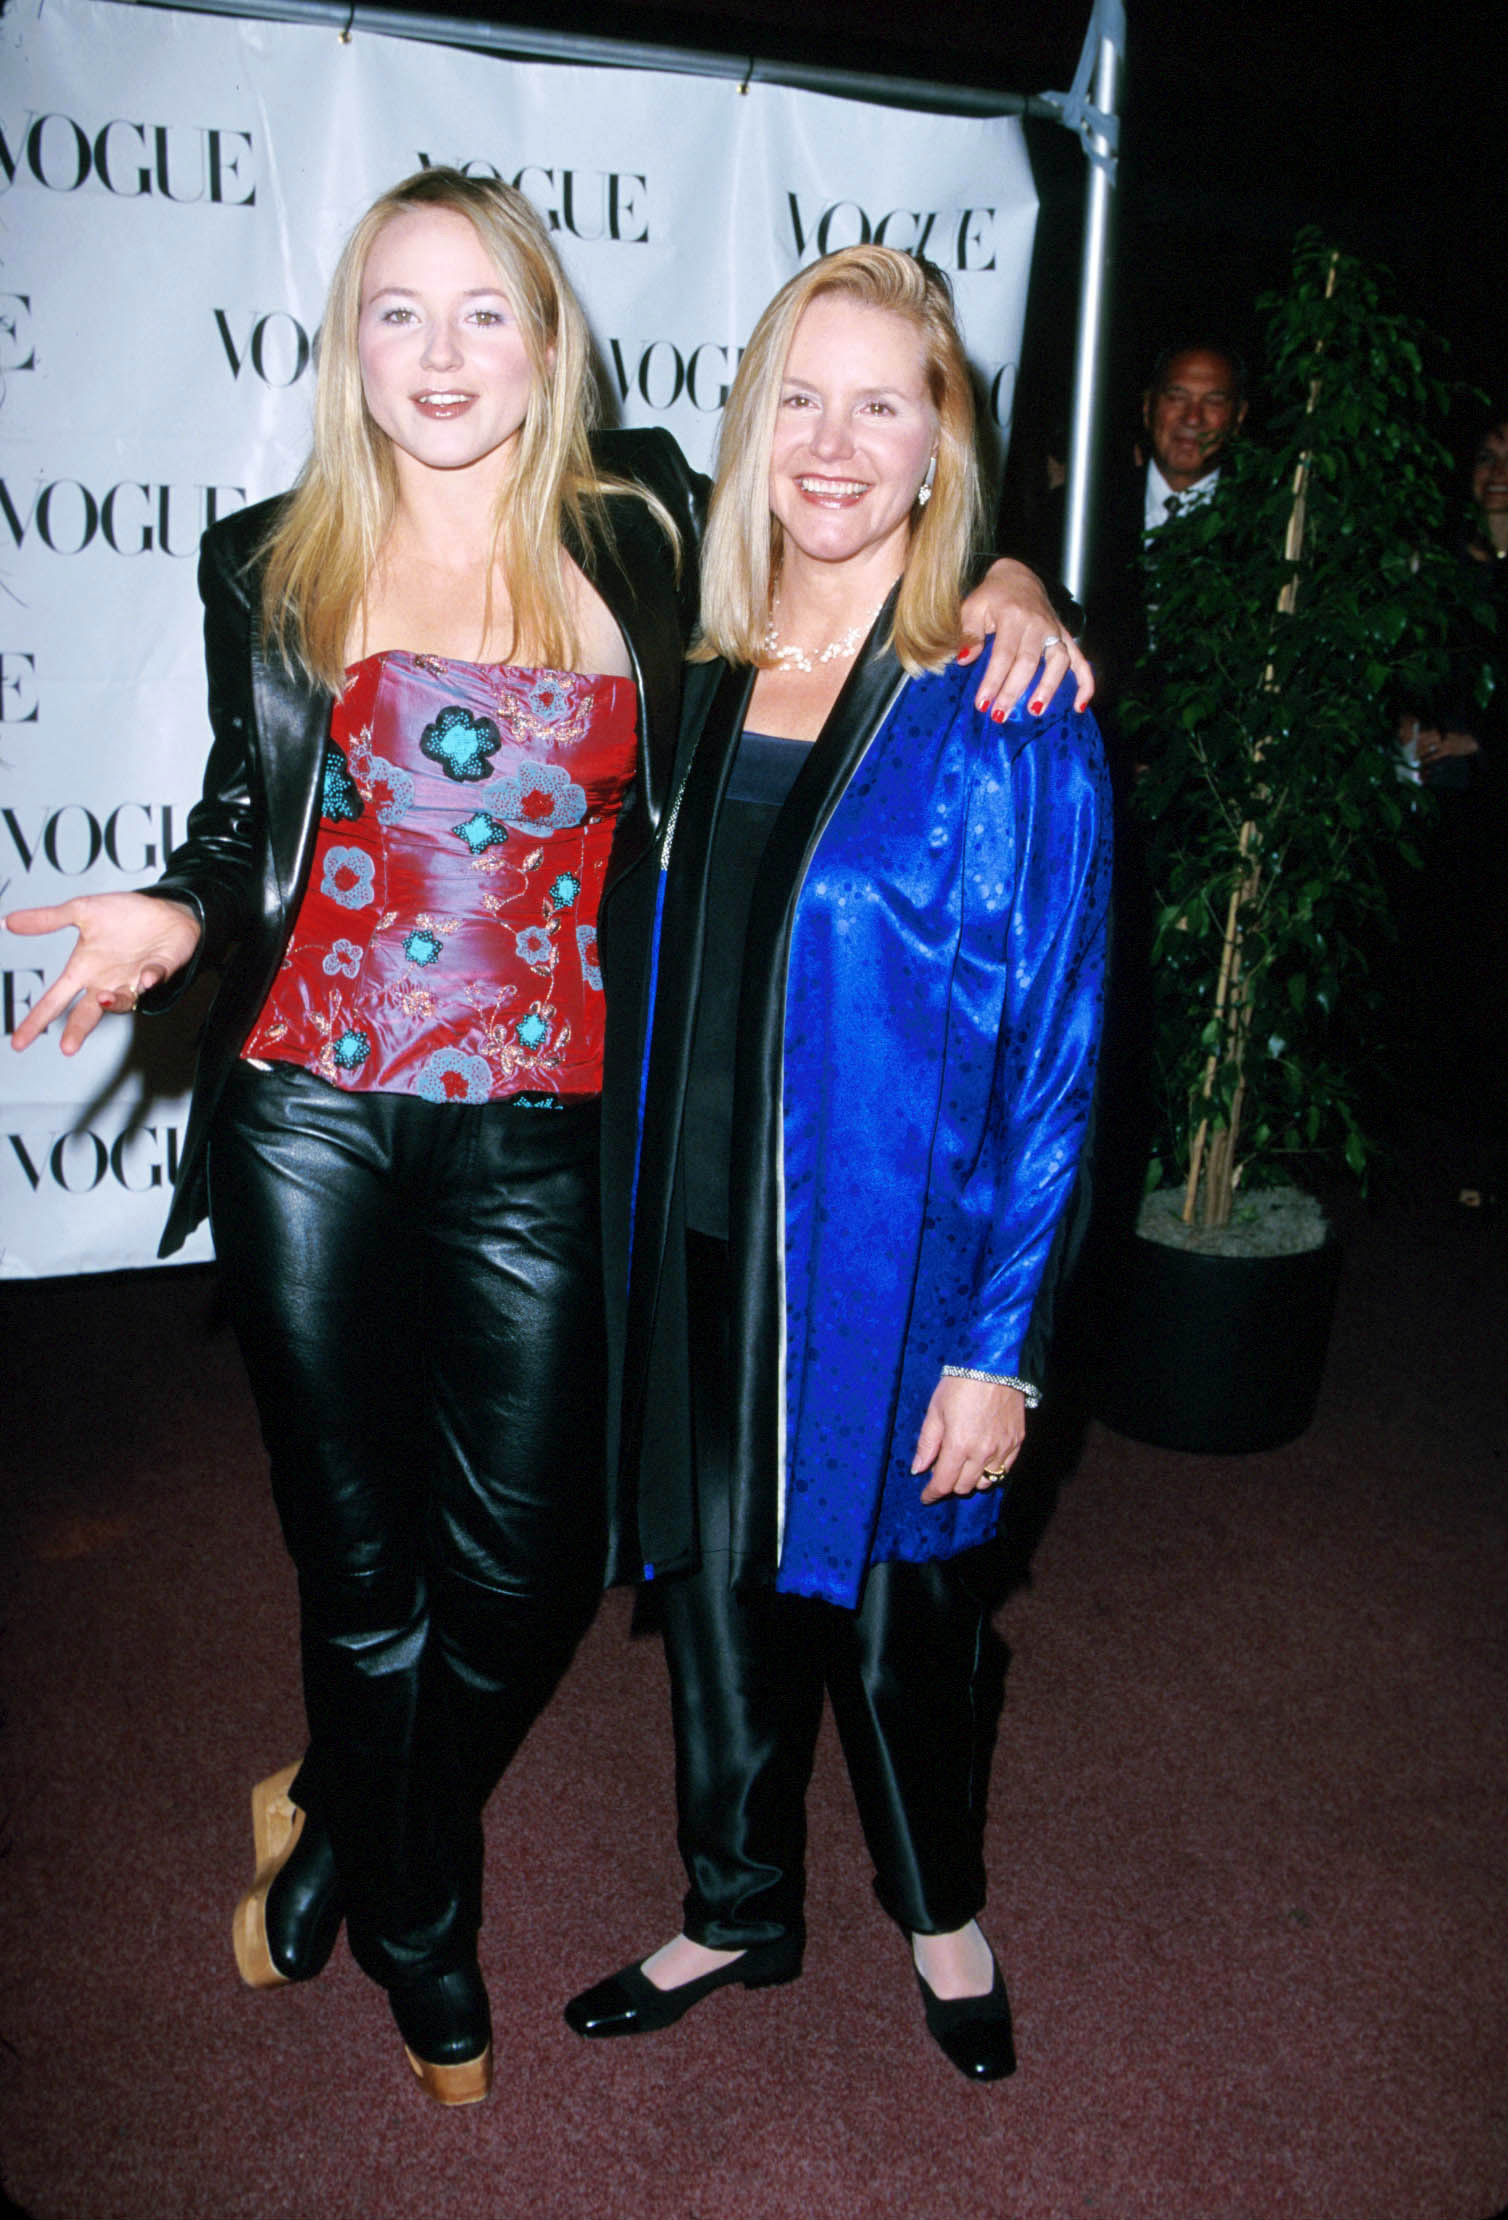 Jewel and Lenedra Caroll during Press Conference for Higher Ground for Humanity in Hollywood, California, on April 25, 1999. | Source: Getty Images